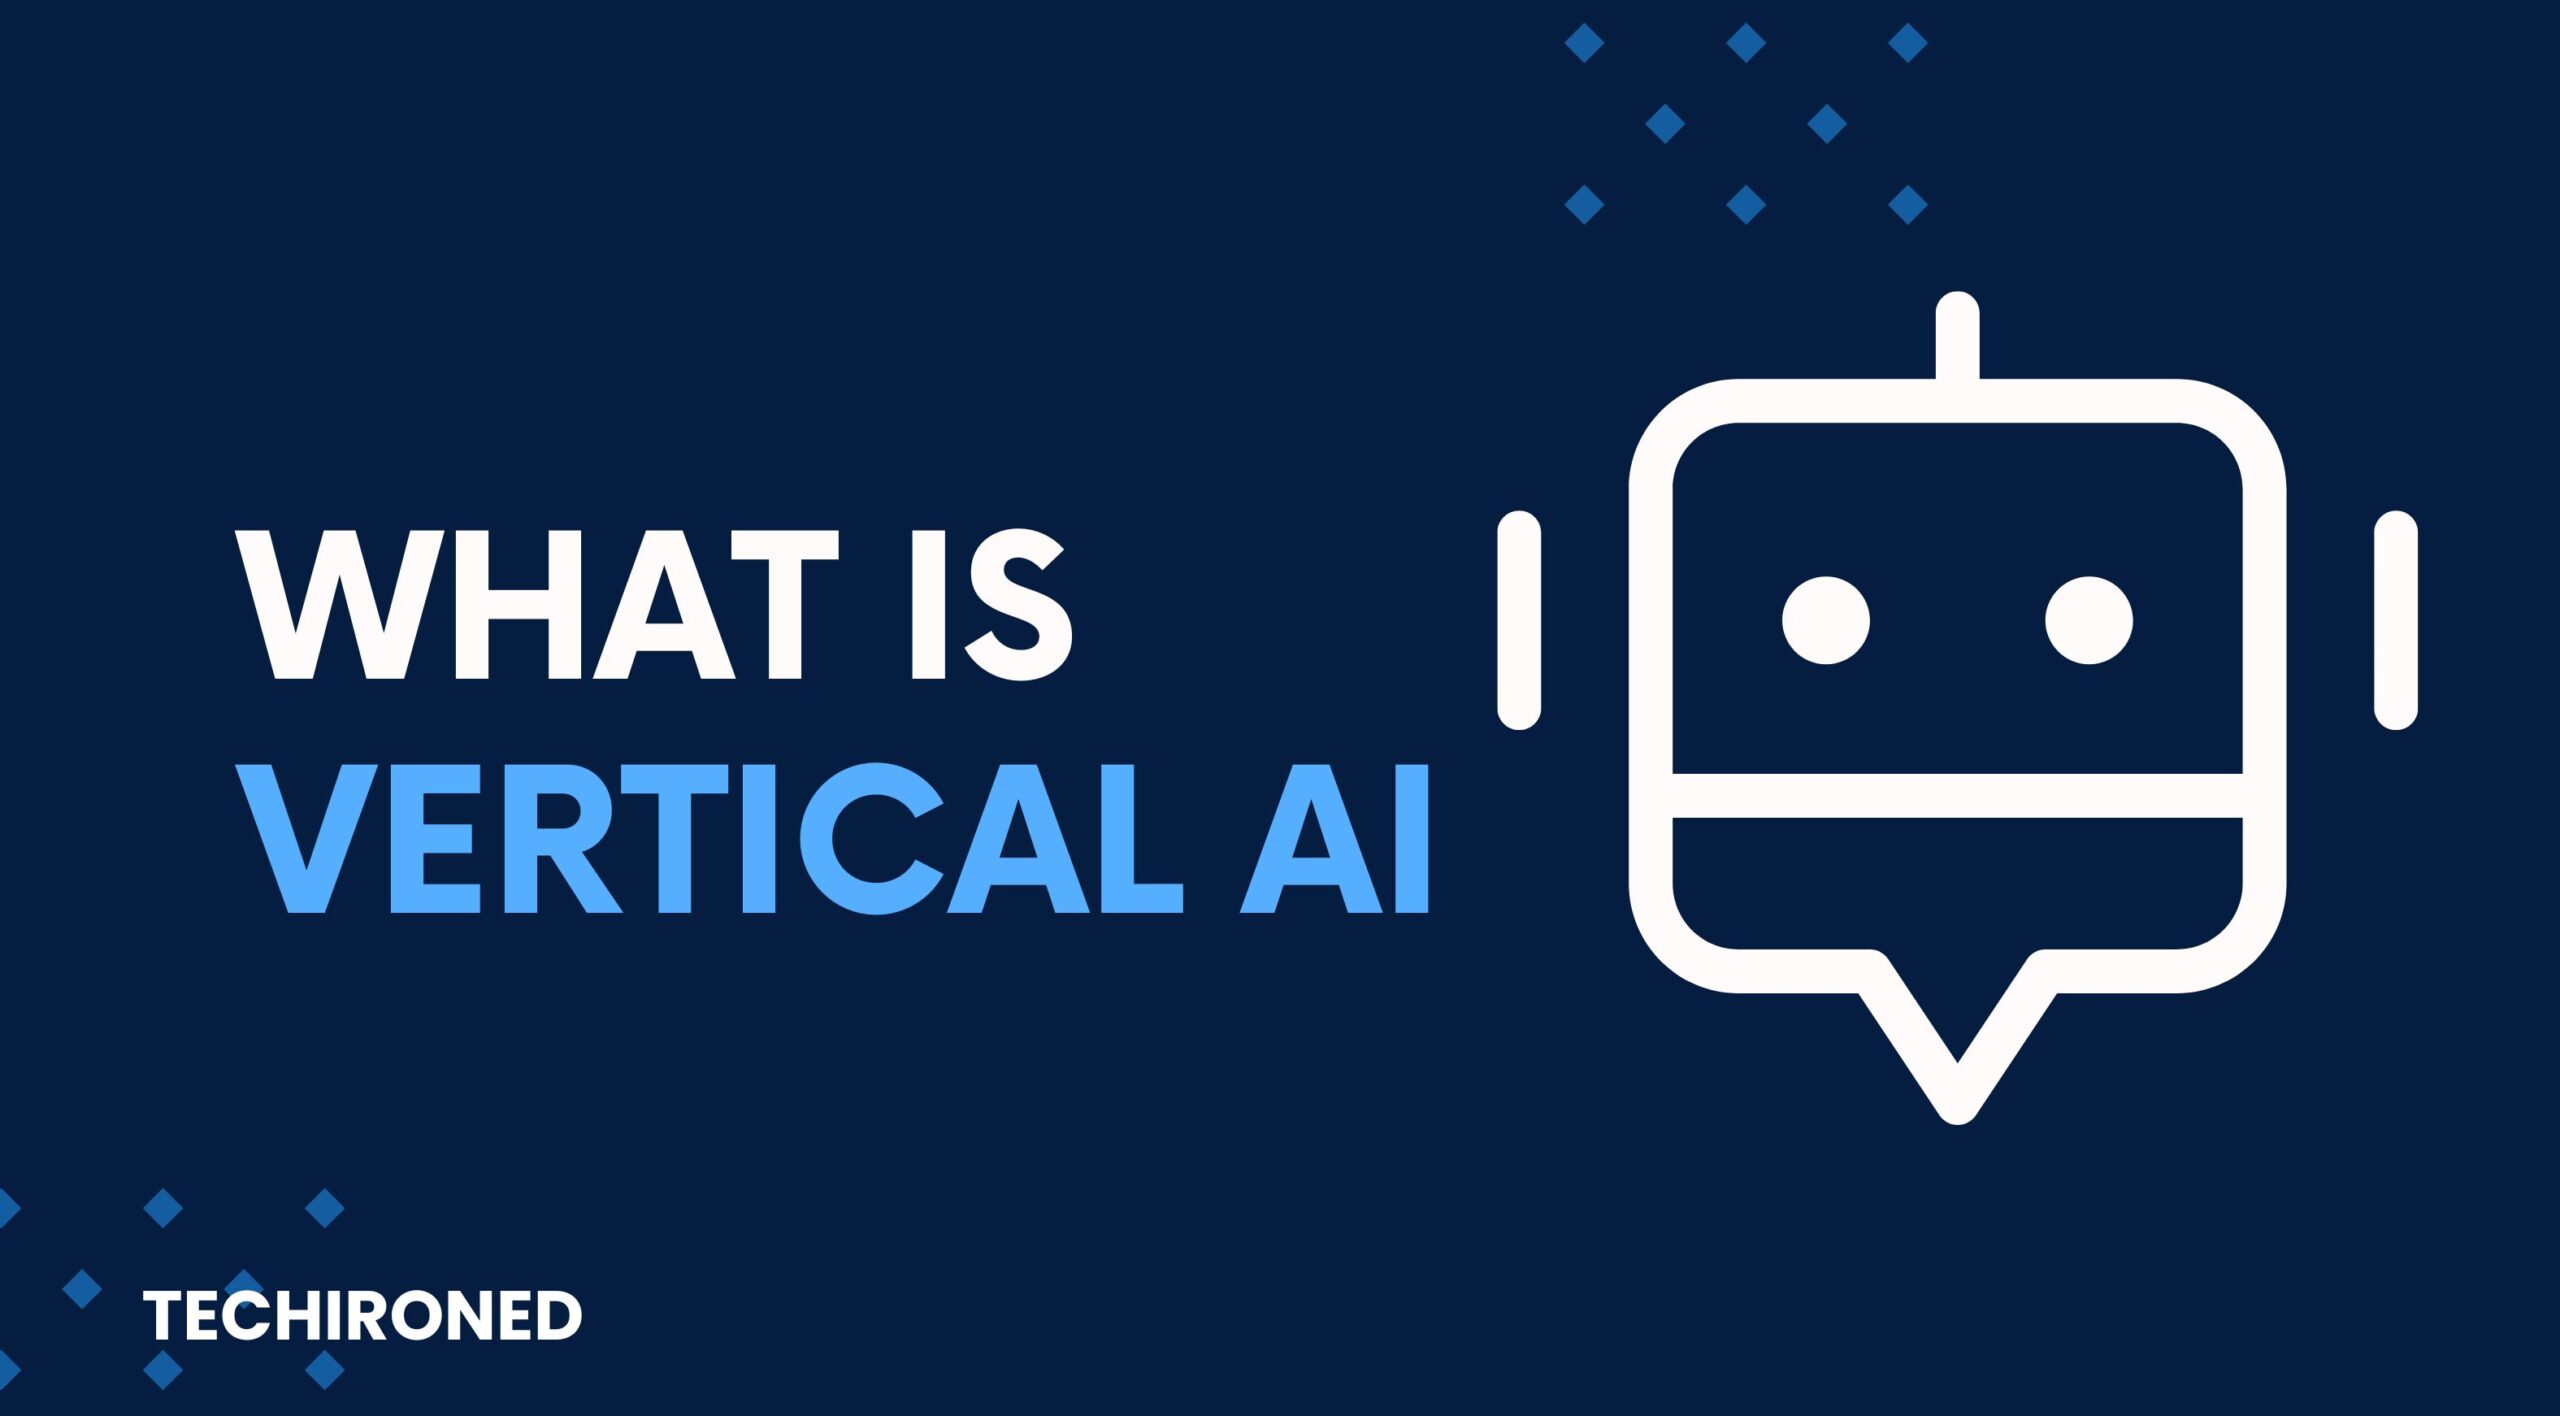 What is vertical ai